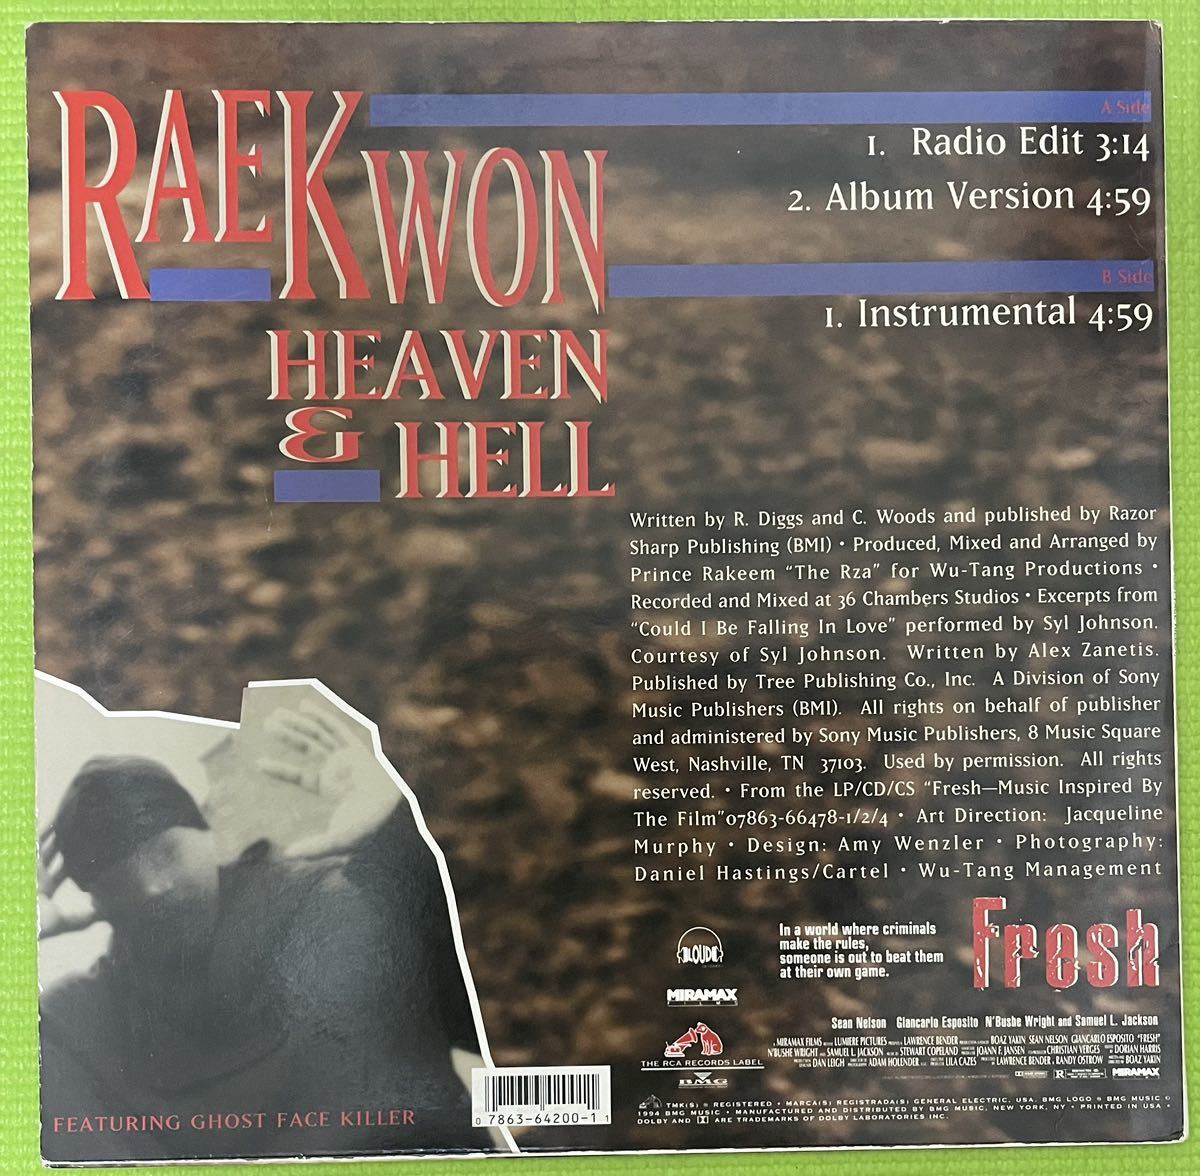 HIPHOP record ヒップホップ　レコード　Raekwon Featuring Ghost Face Killer* Heaven & Hell 1994_画像2